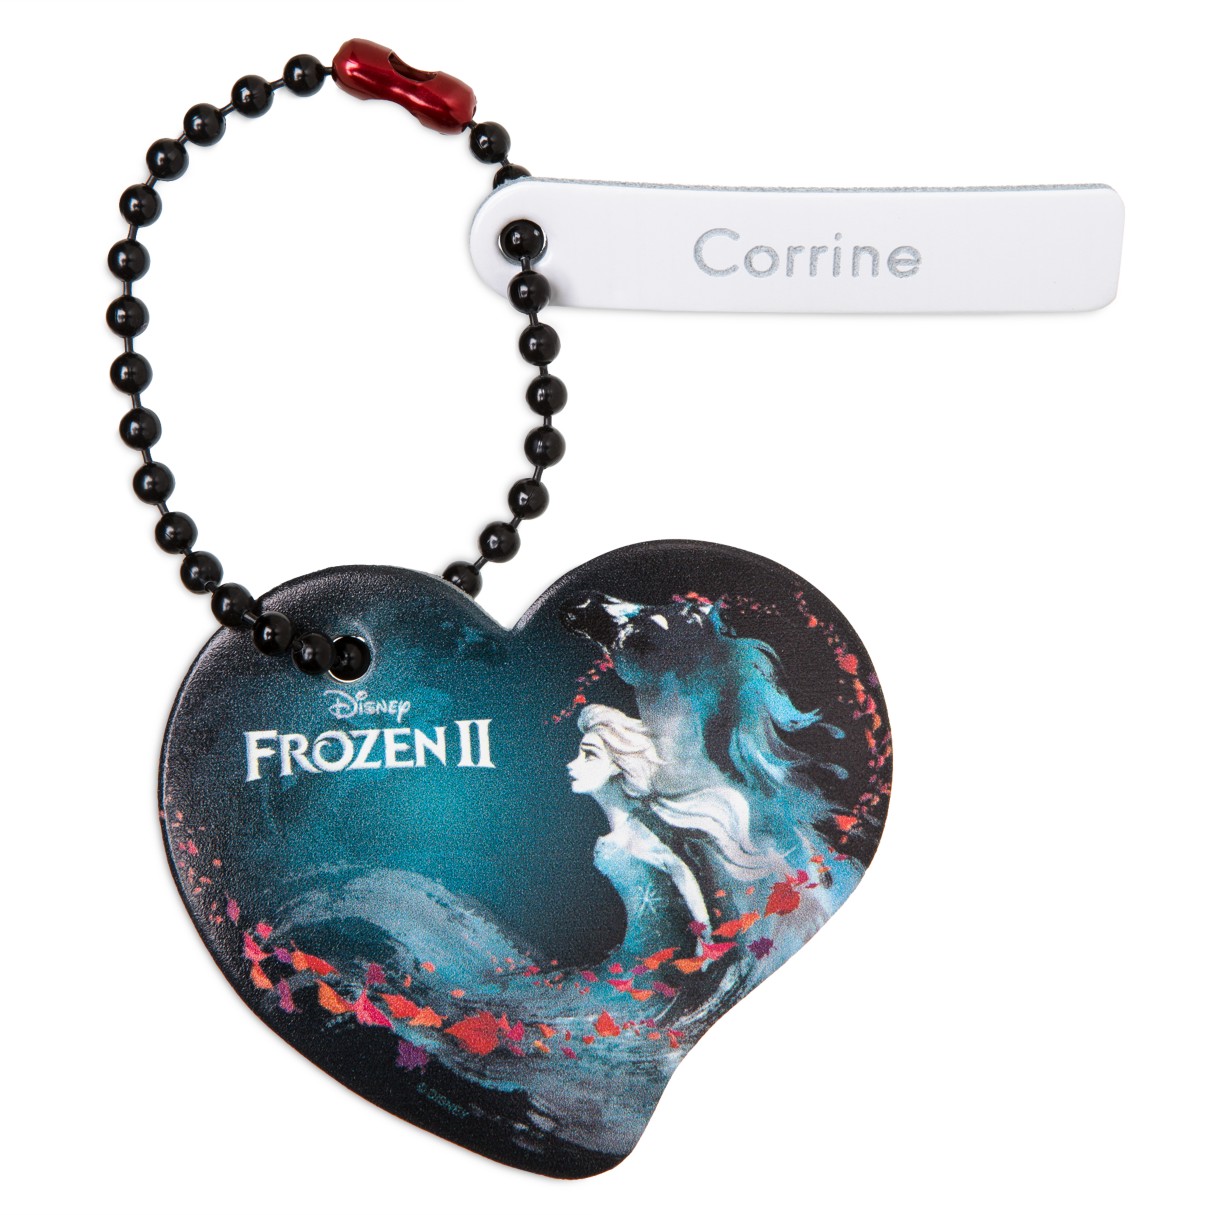 Frozen 2 Heart Tag by Leather Treaty – Personalized